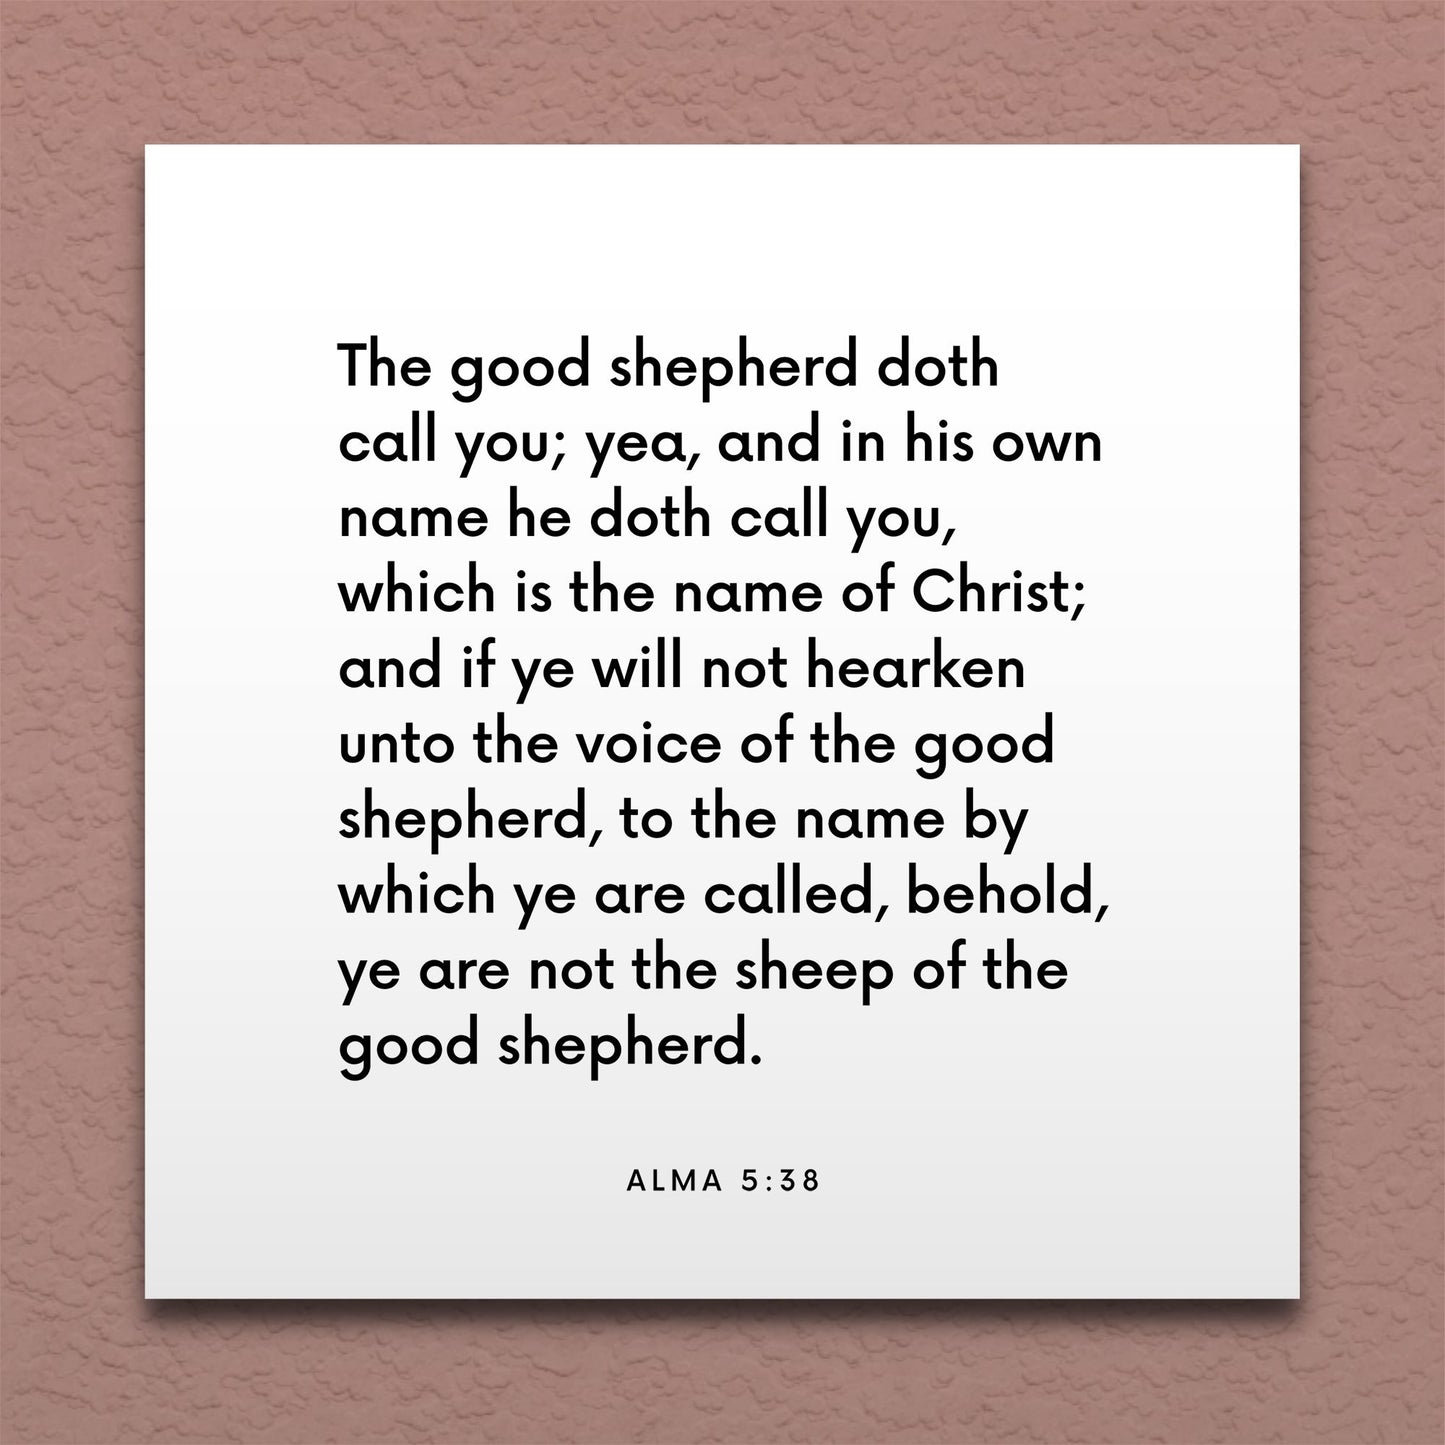 Wall-mounted scripture tile for Alma 5:38 - "The good shepherd doth call you"